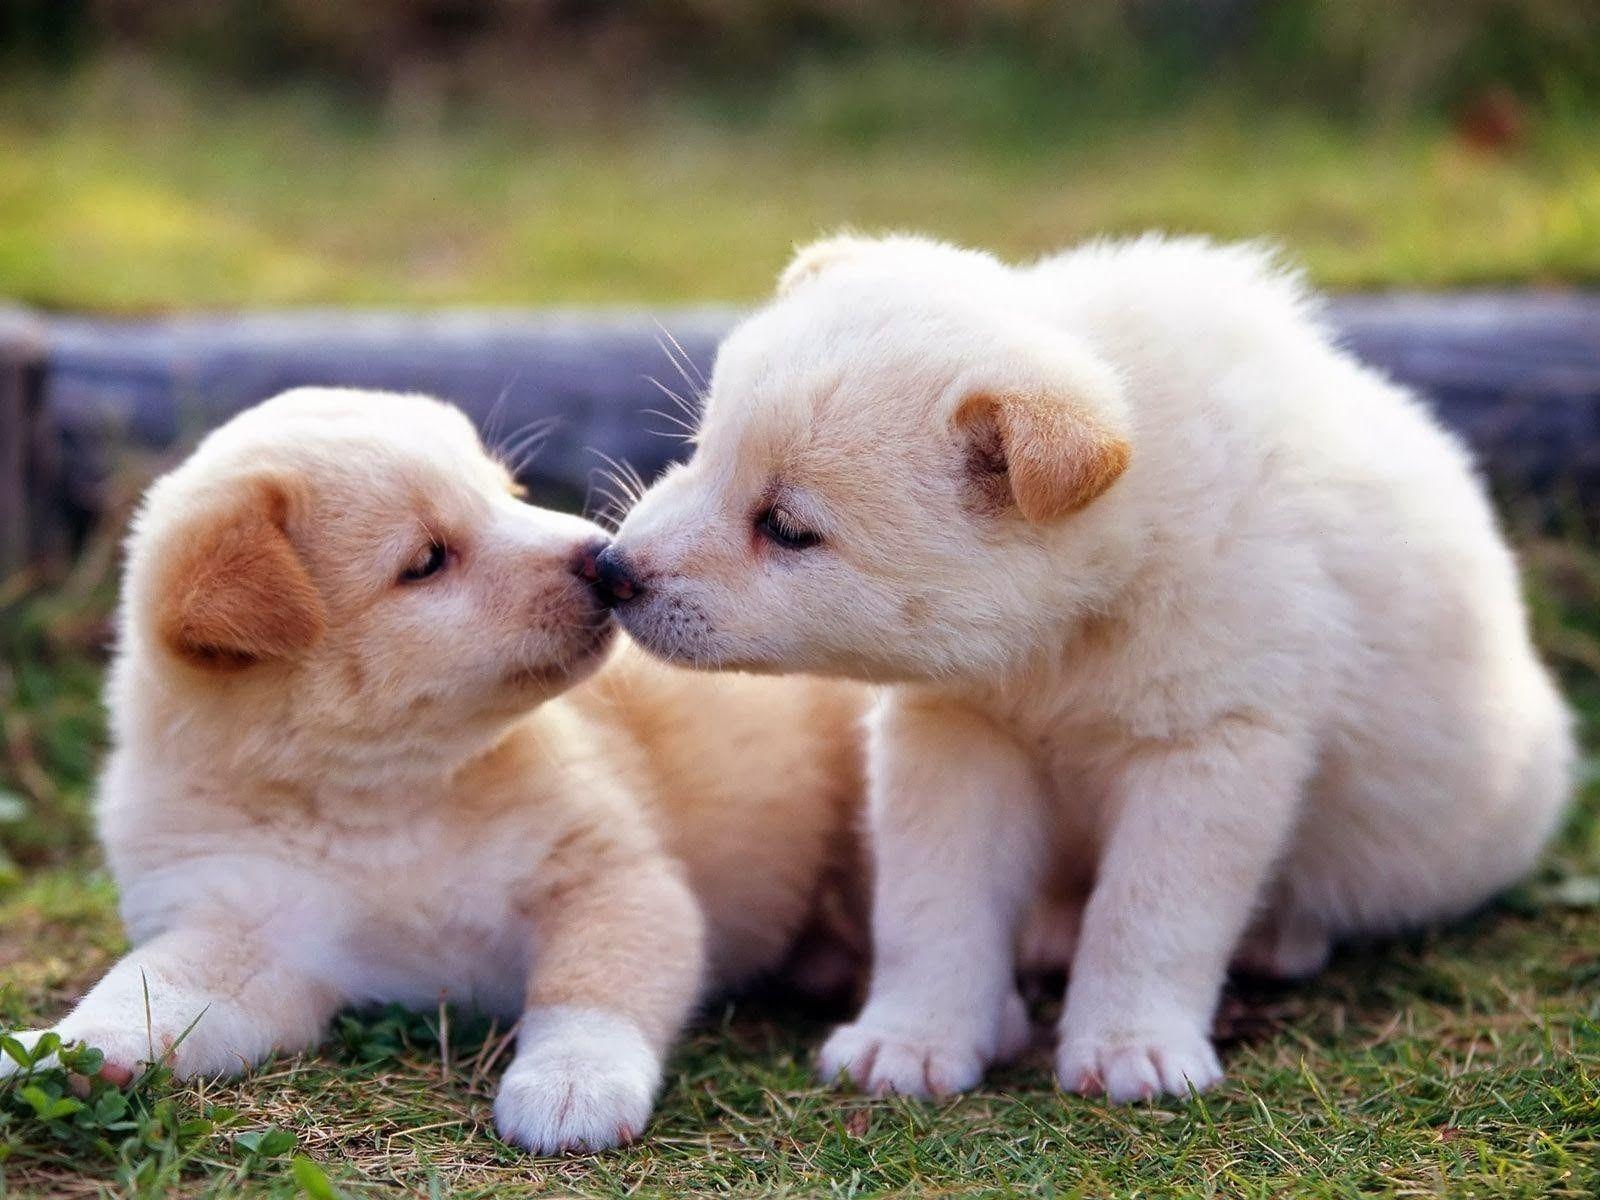 kiss day HD happy kiss day 2014.hd wallpaper cute pics of dogs Valentine's Day Image. Cute animals puppies, Baby animals picture, Animals kissing